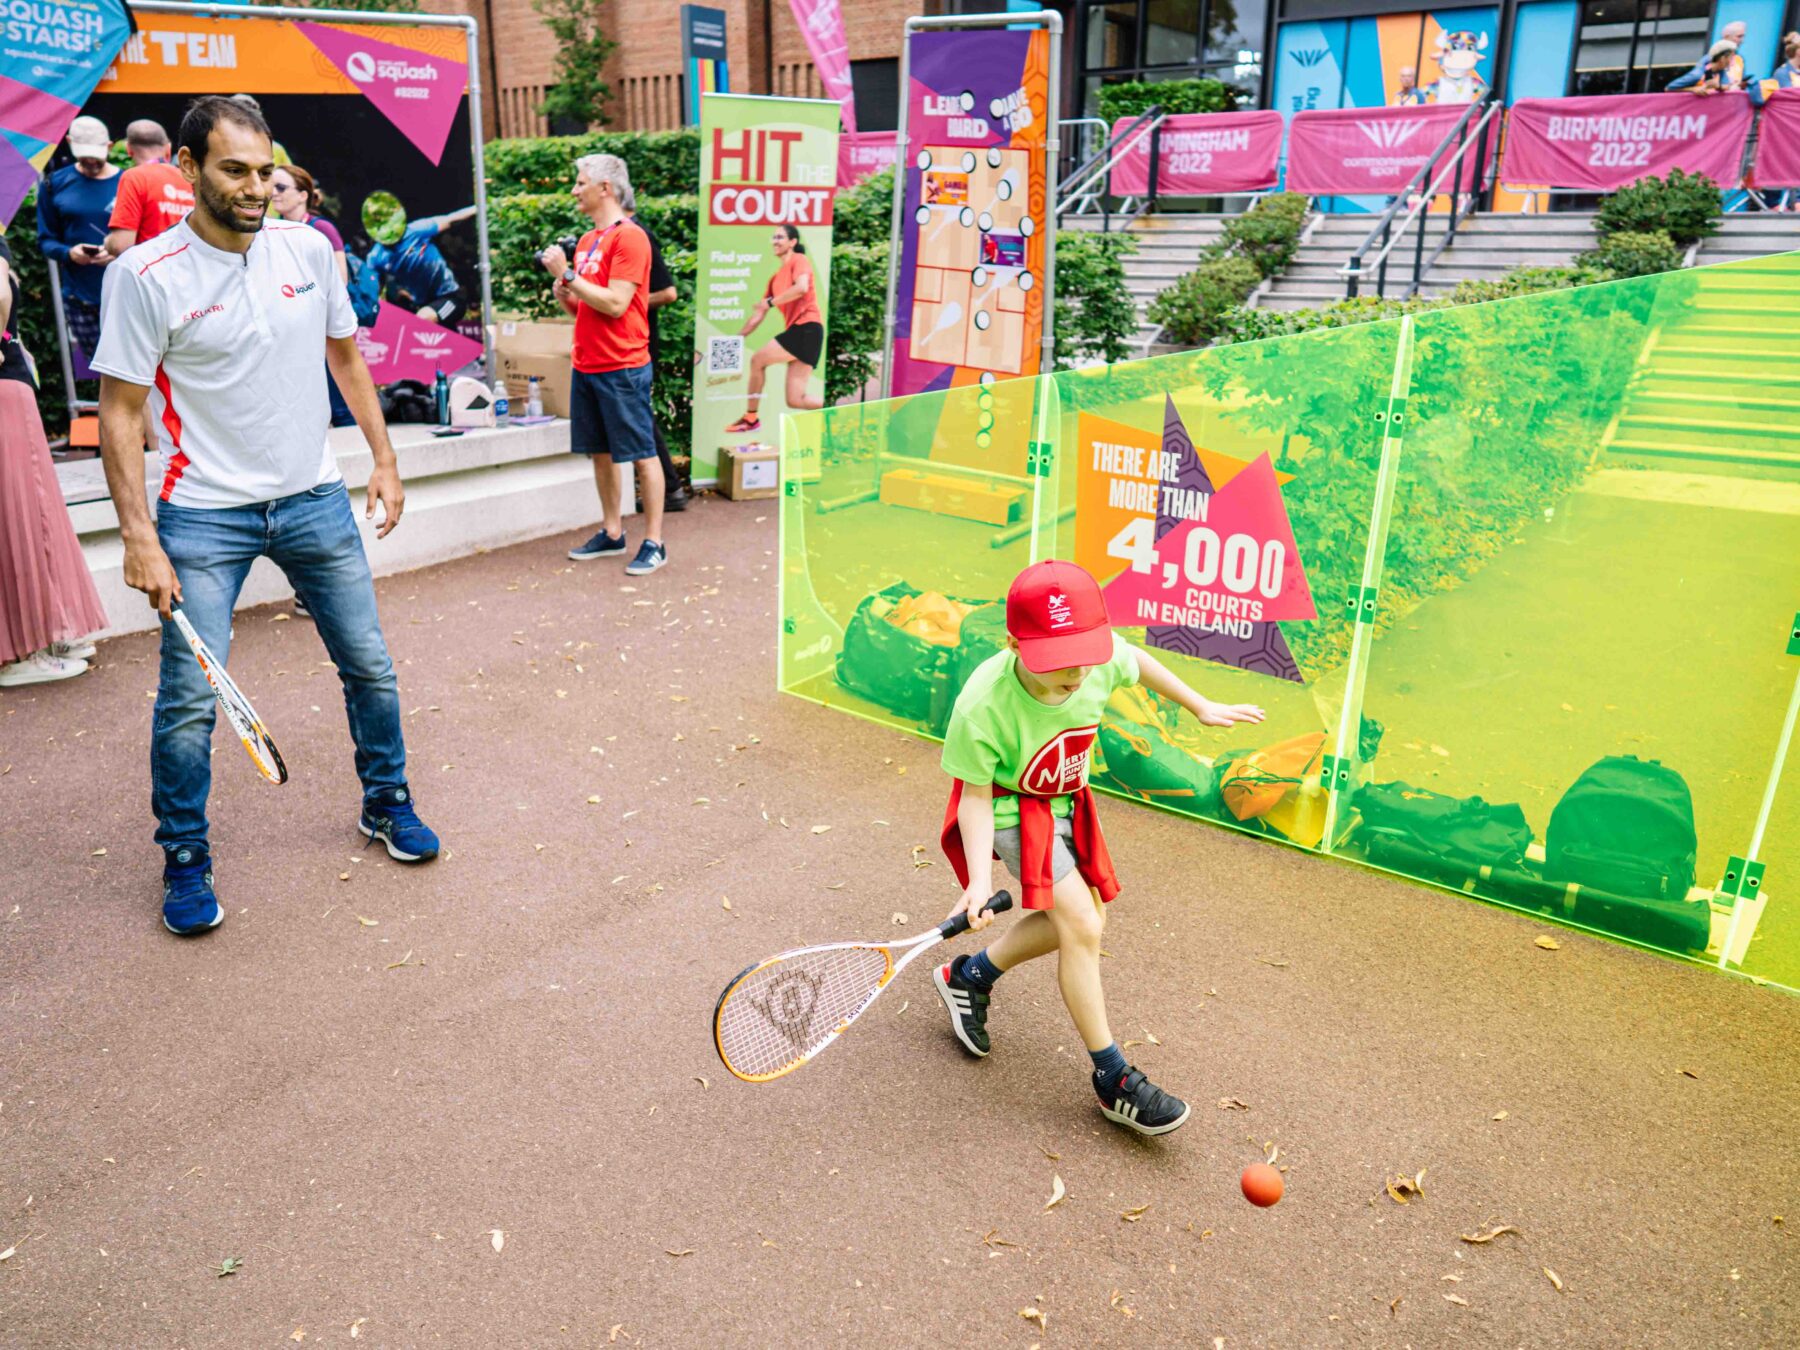 Mohamed ElShorbagy (left) has a hit with a child on a mini court in Birmingham.